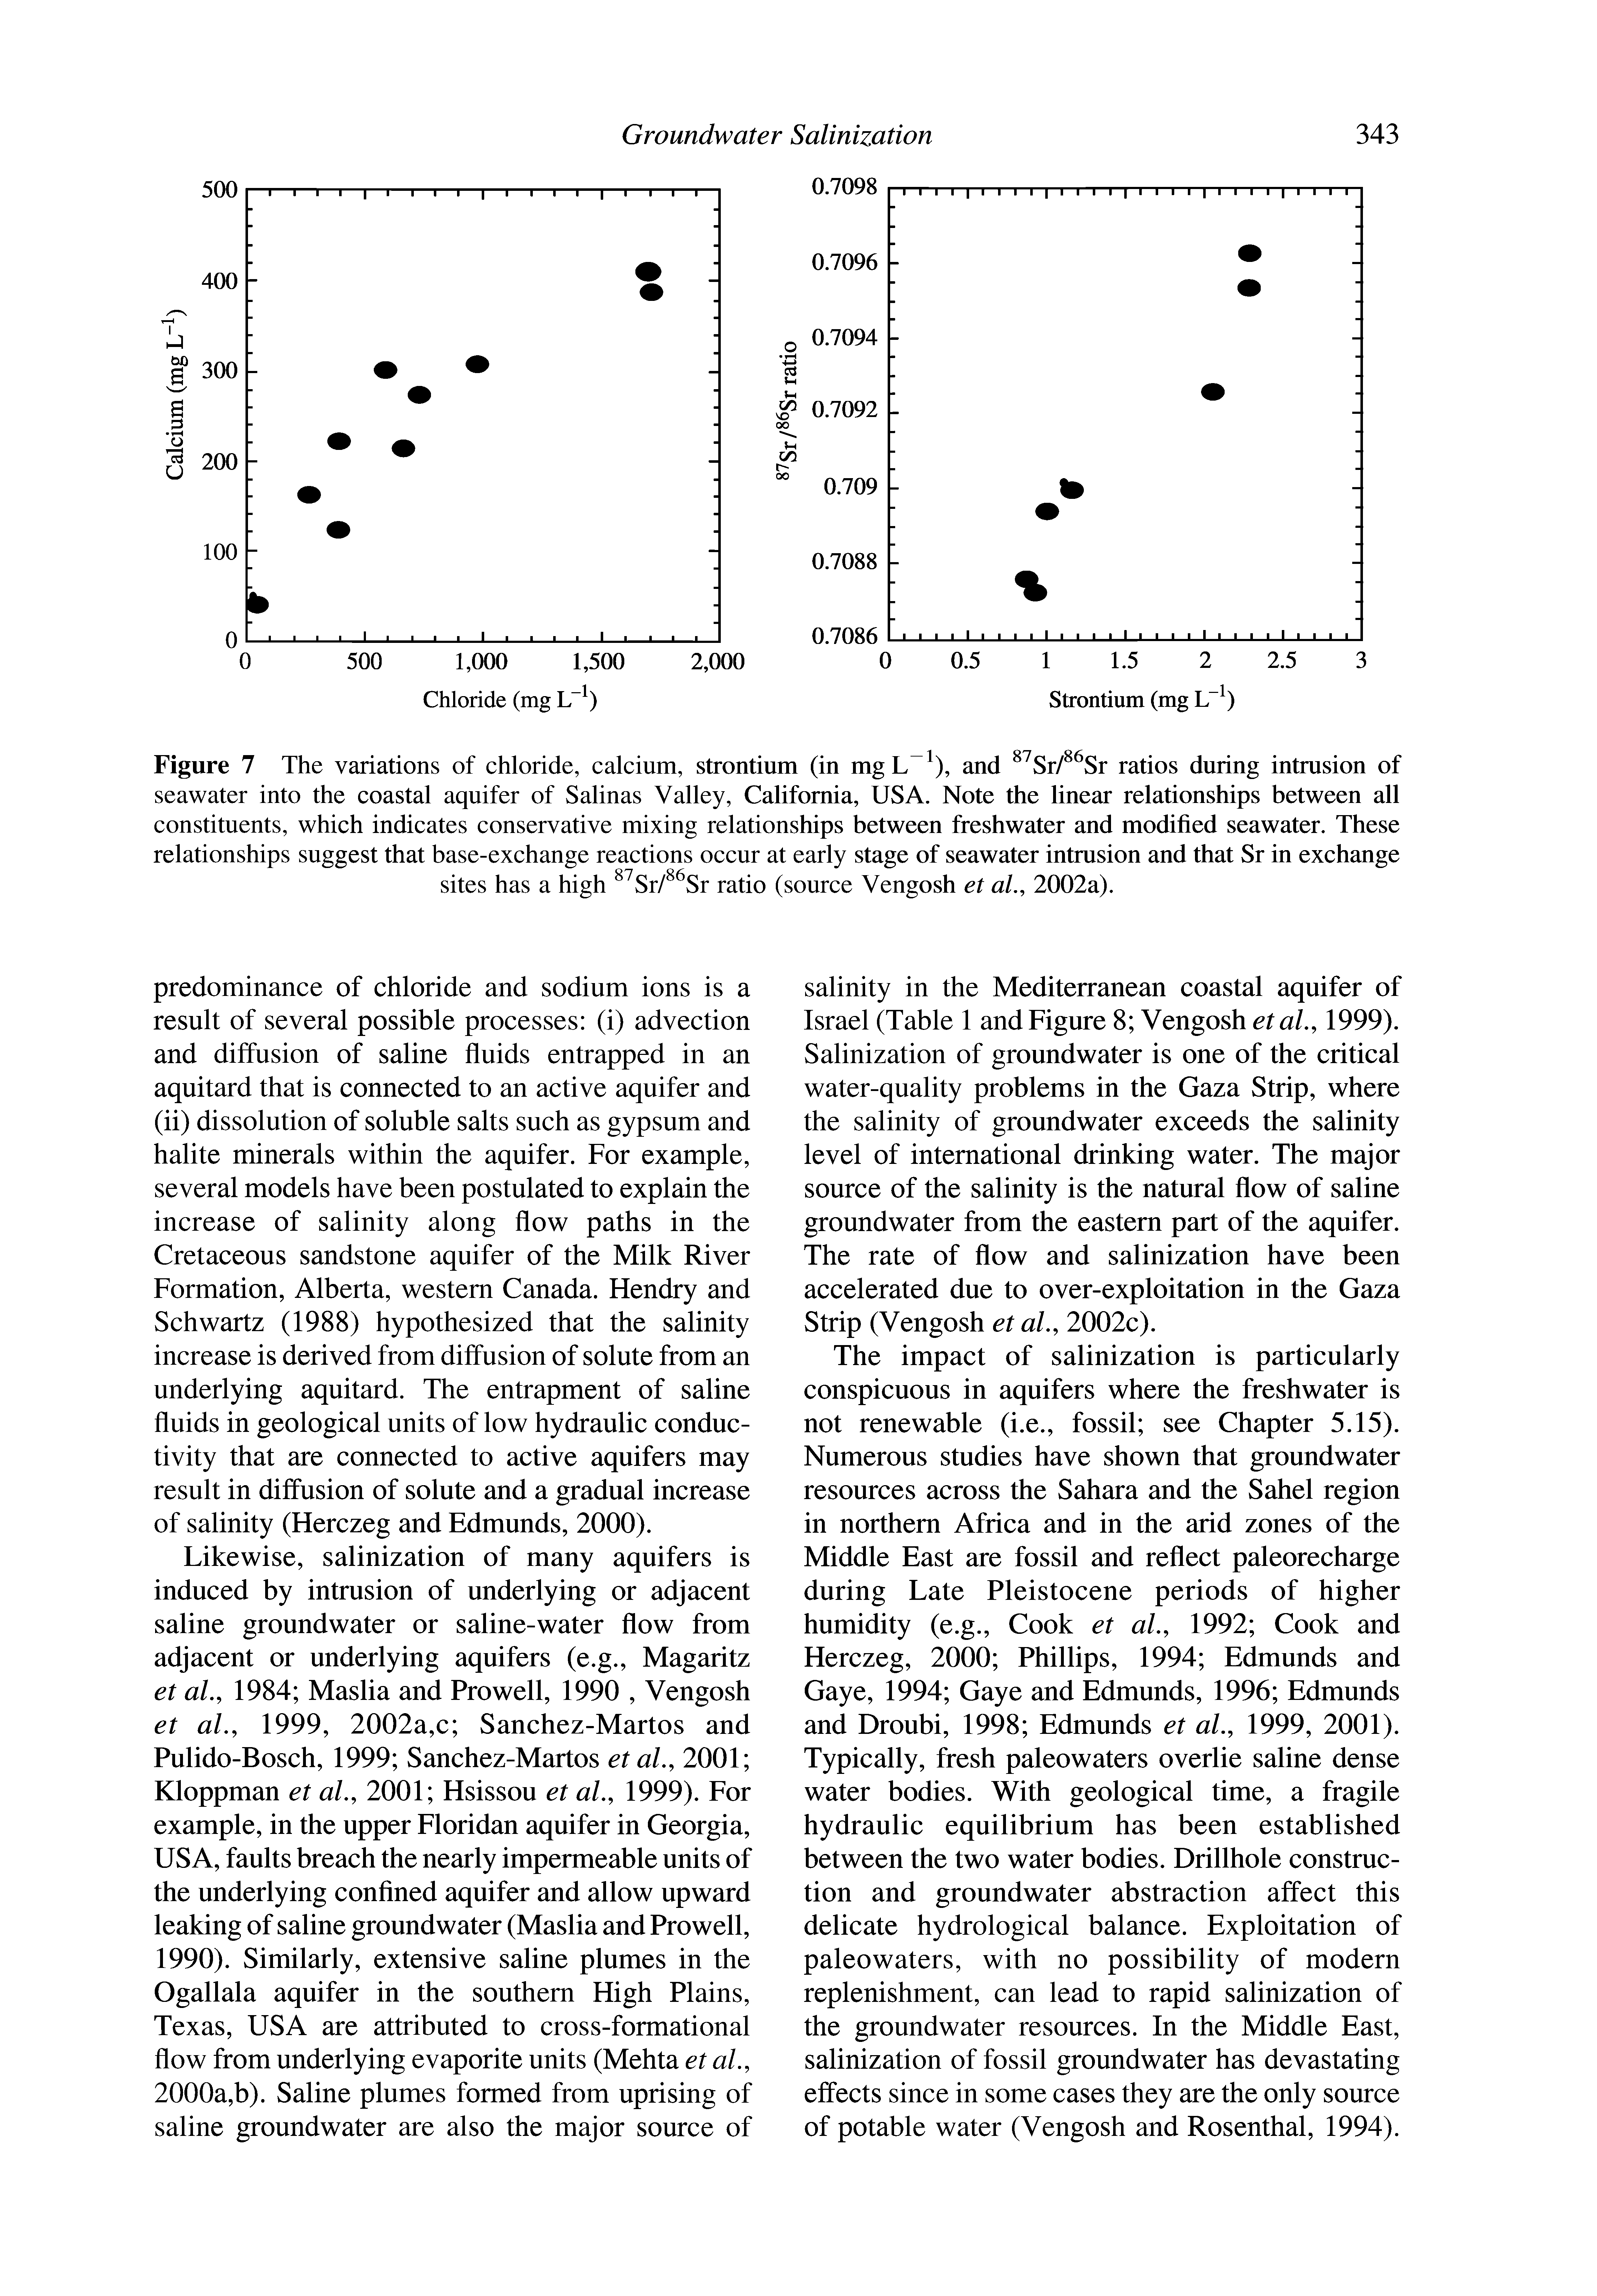 Figure 7 The variations of chloride, calcium, strontium (in mgL ), and Sr/ Sr ratios during intrusion of seawater into the coastal aquifer of Salinas Valley, California, USA. Note the linear relationships between all constituents, which indicates conservative mixing relationships between freshwater and modified seawater. These relationships suggest that base-exchange reactions occur at early stage of seawater intrusion and that Sr in exchange sites has a high Sr/ Sr ratio (source Vengosh et aL, 2002a).